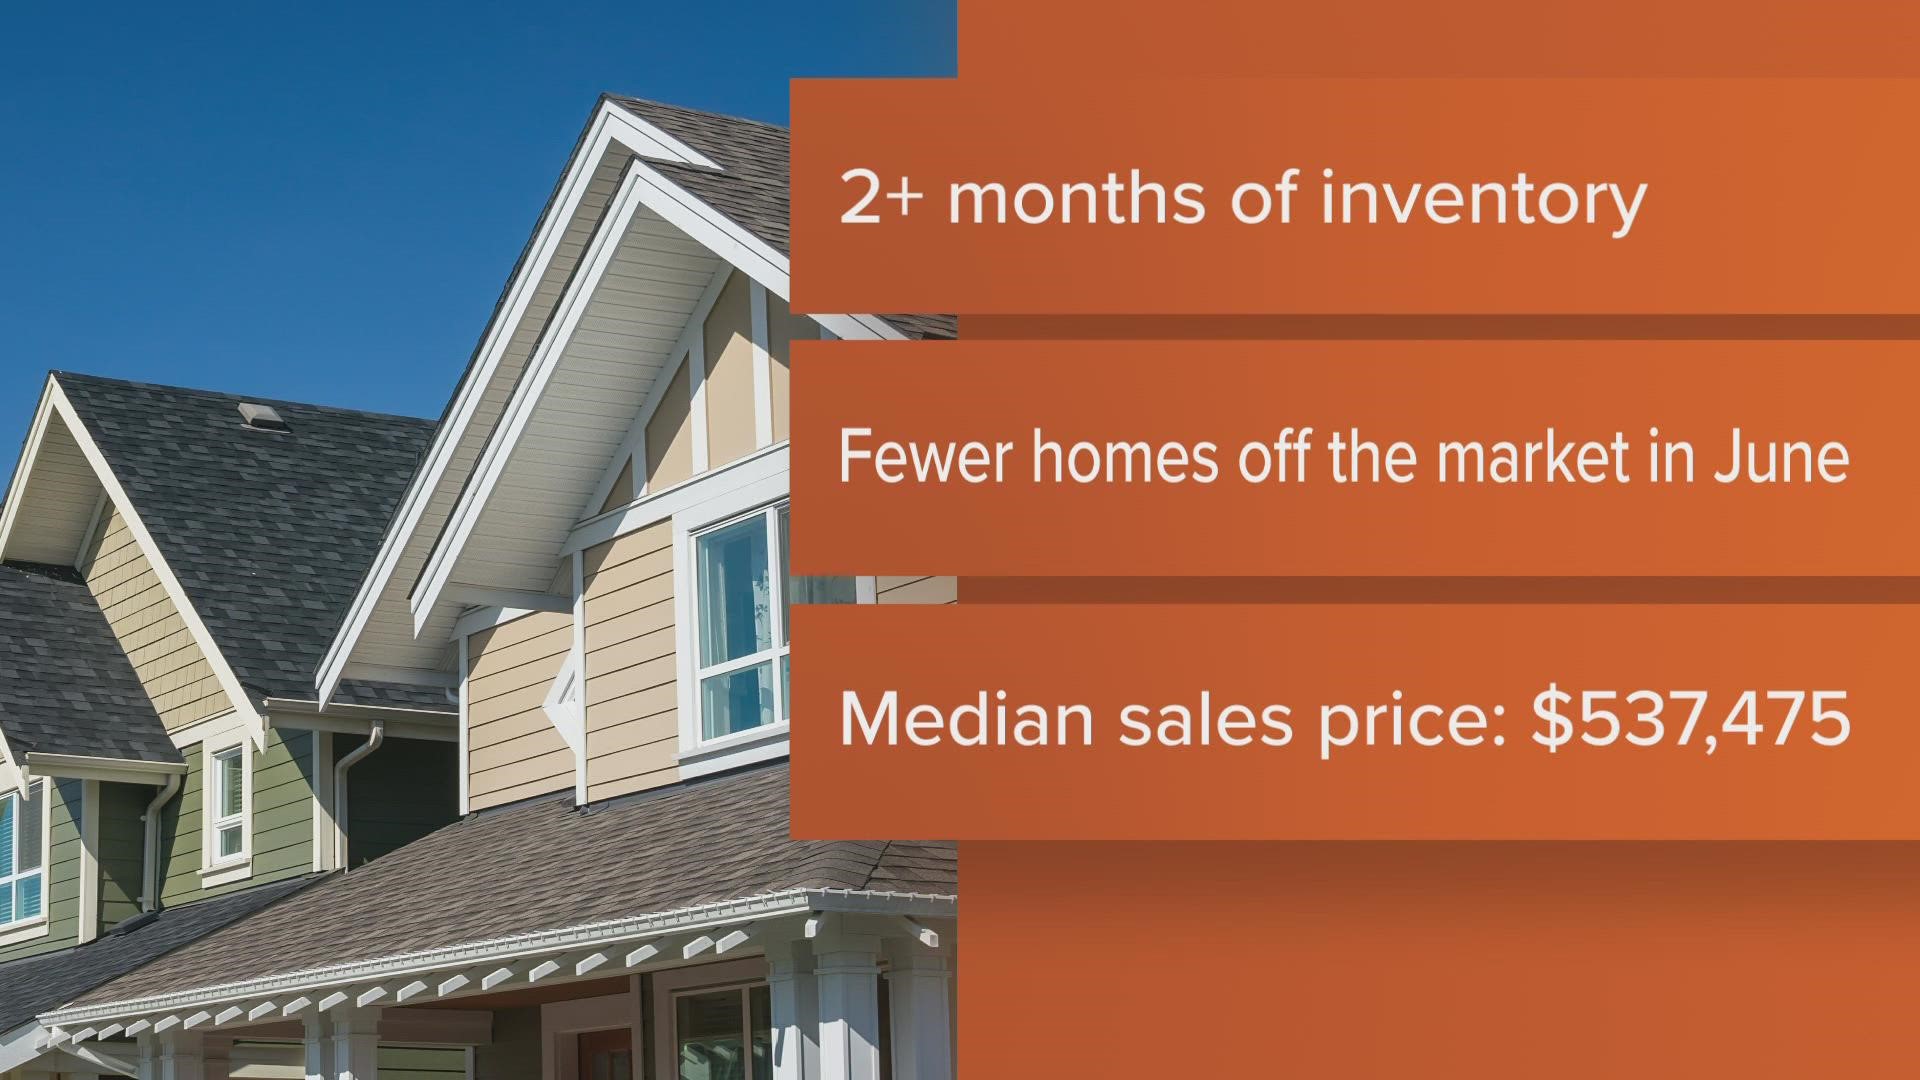 New data from the Austin Board of Realtors find there is plenty of inventory for potential homebuyers.